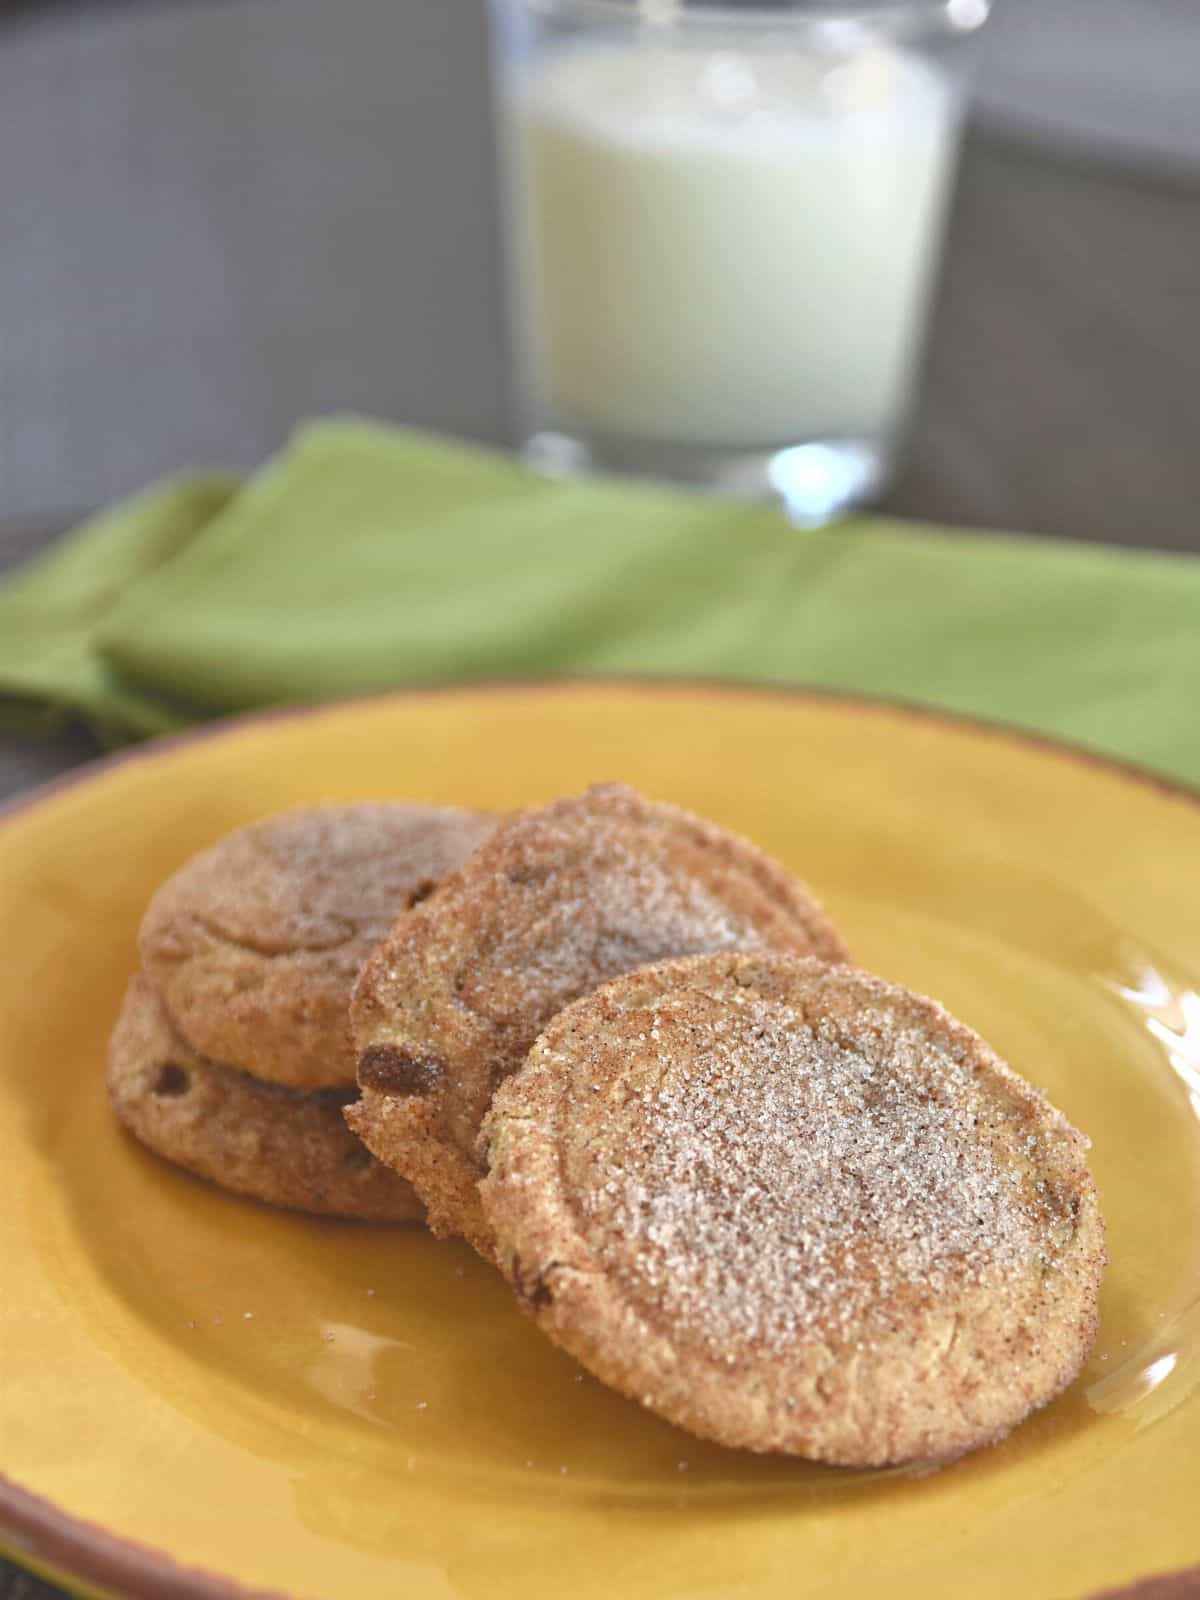 snickerdoodle cookies on yellow plate with glass of milk in the background.